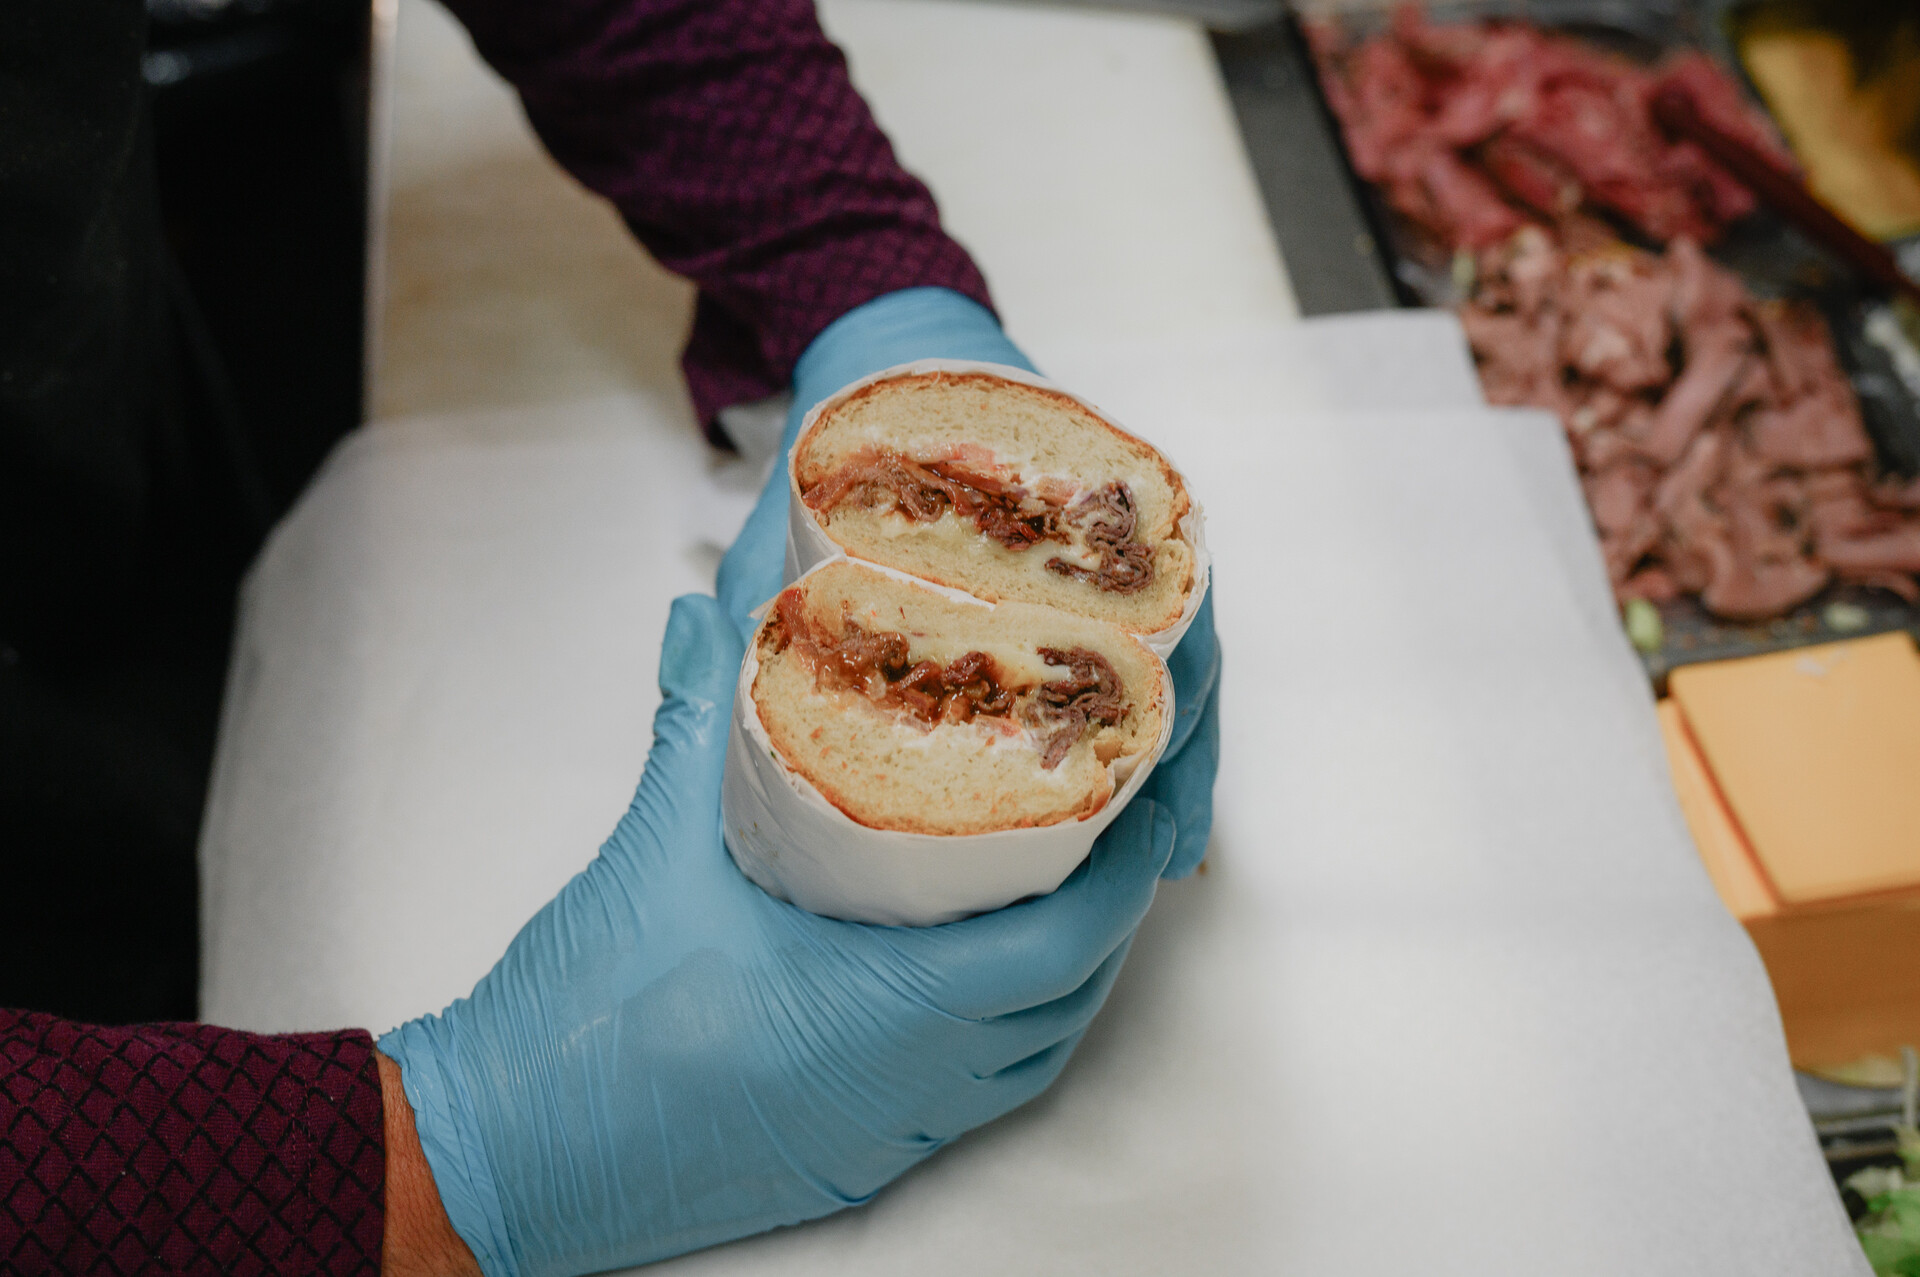 A deli worker wearing blue kitchen gloves holds a pastrami sandwich, cut so that the meaty cross section is visible.